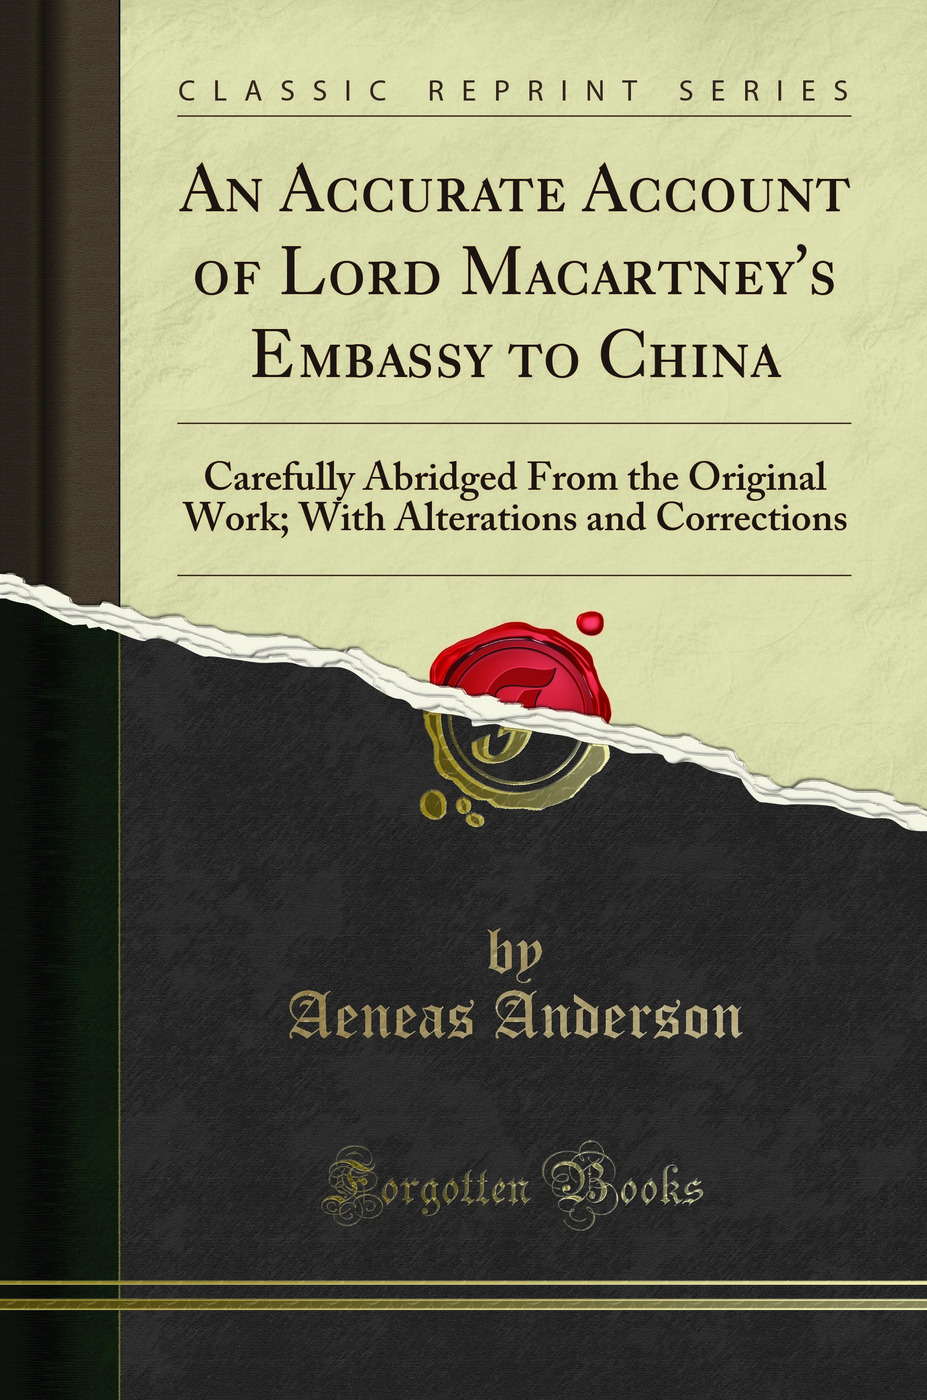 An Accurate Account of Lord Macartney's Embassy to China (Classic Reprint) - Aeneas Anderson